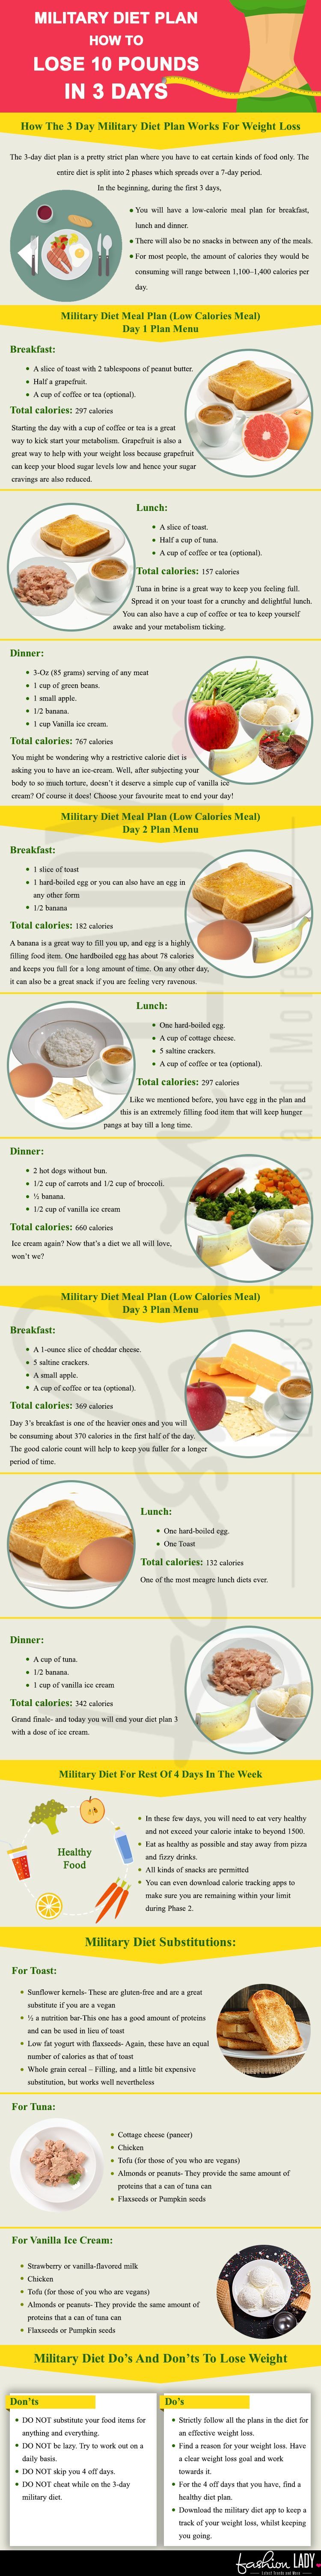 Military Diet Plan – Here’s How You Can Lose 10 Pounds In 3 Days